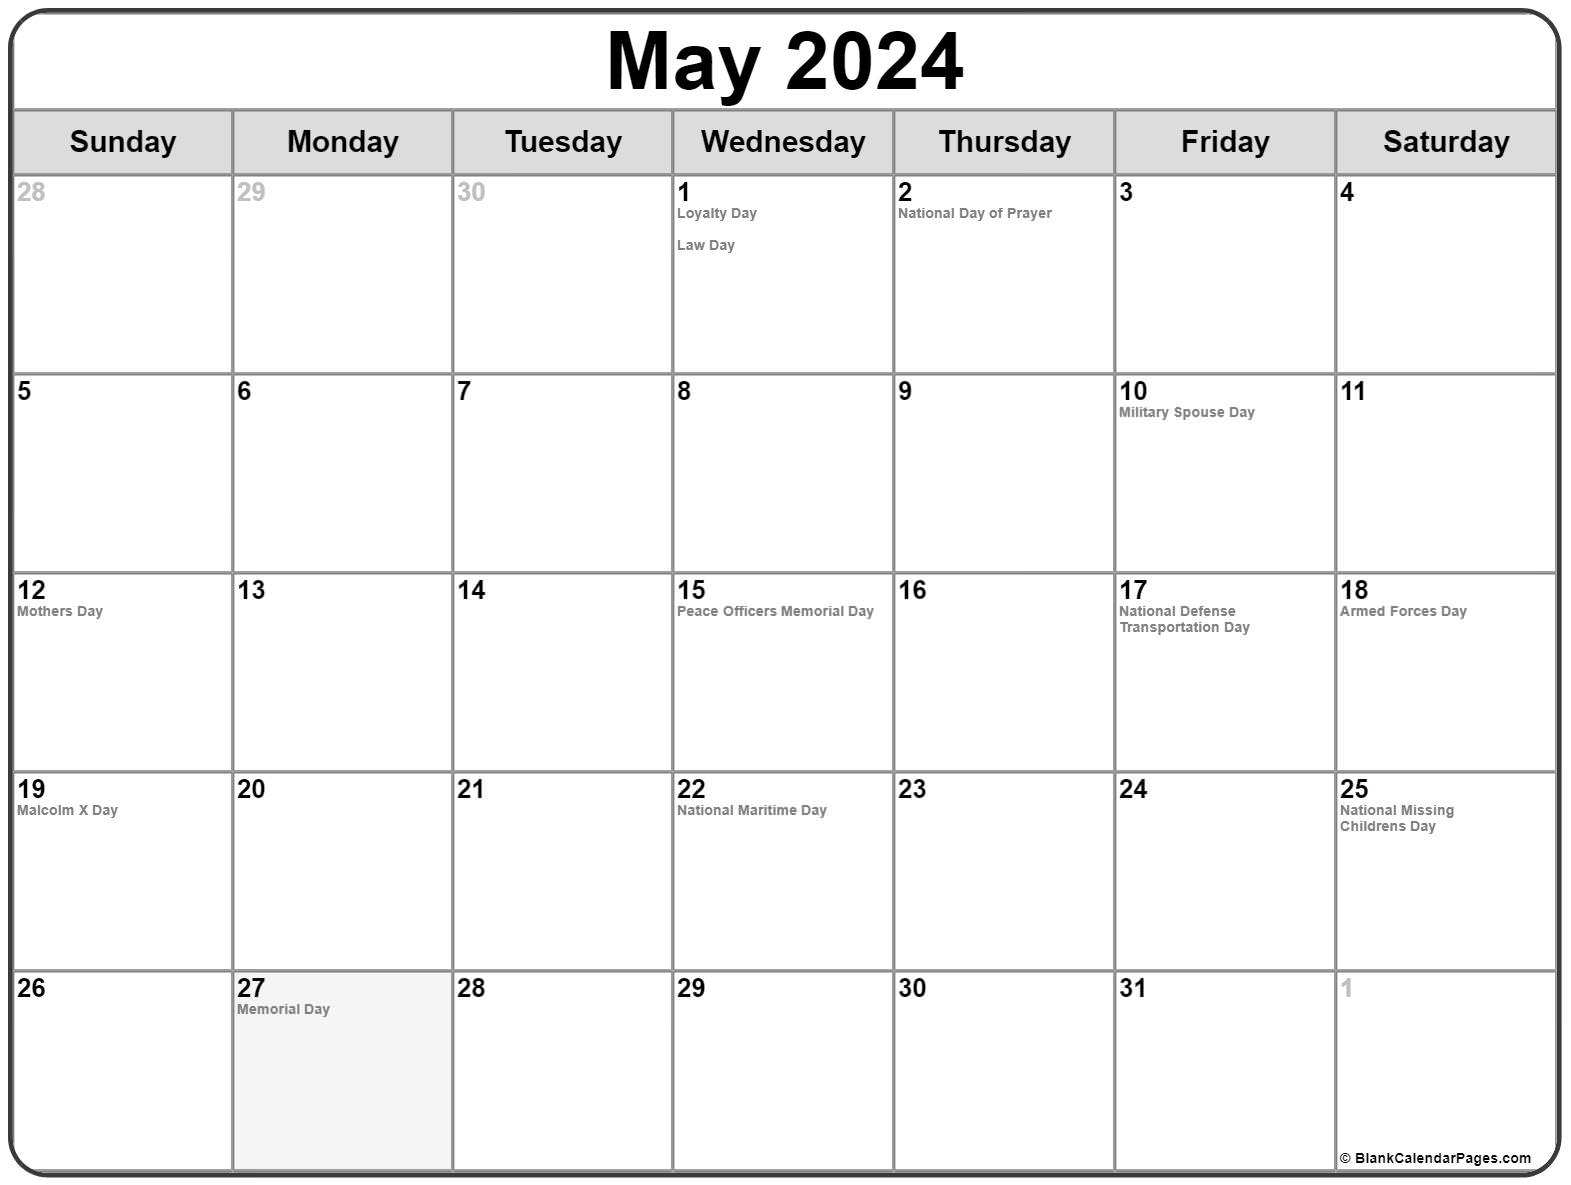 May 2020 calendar with holidays